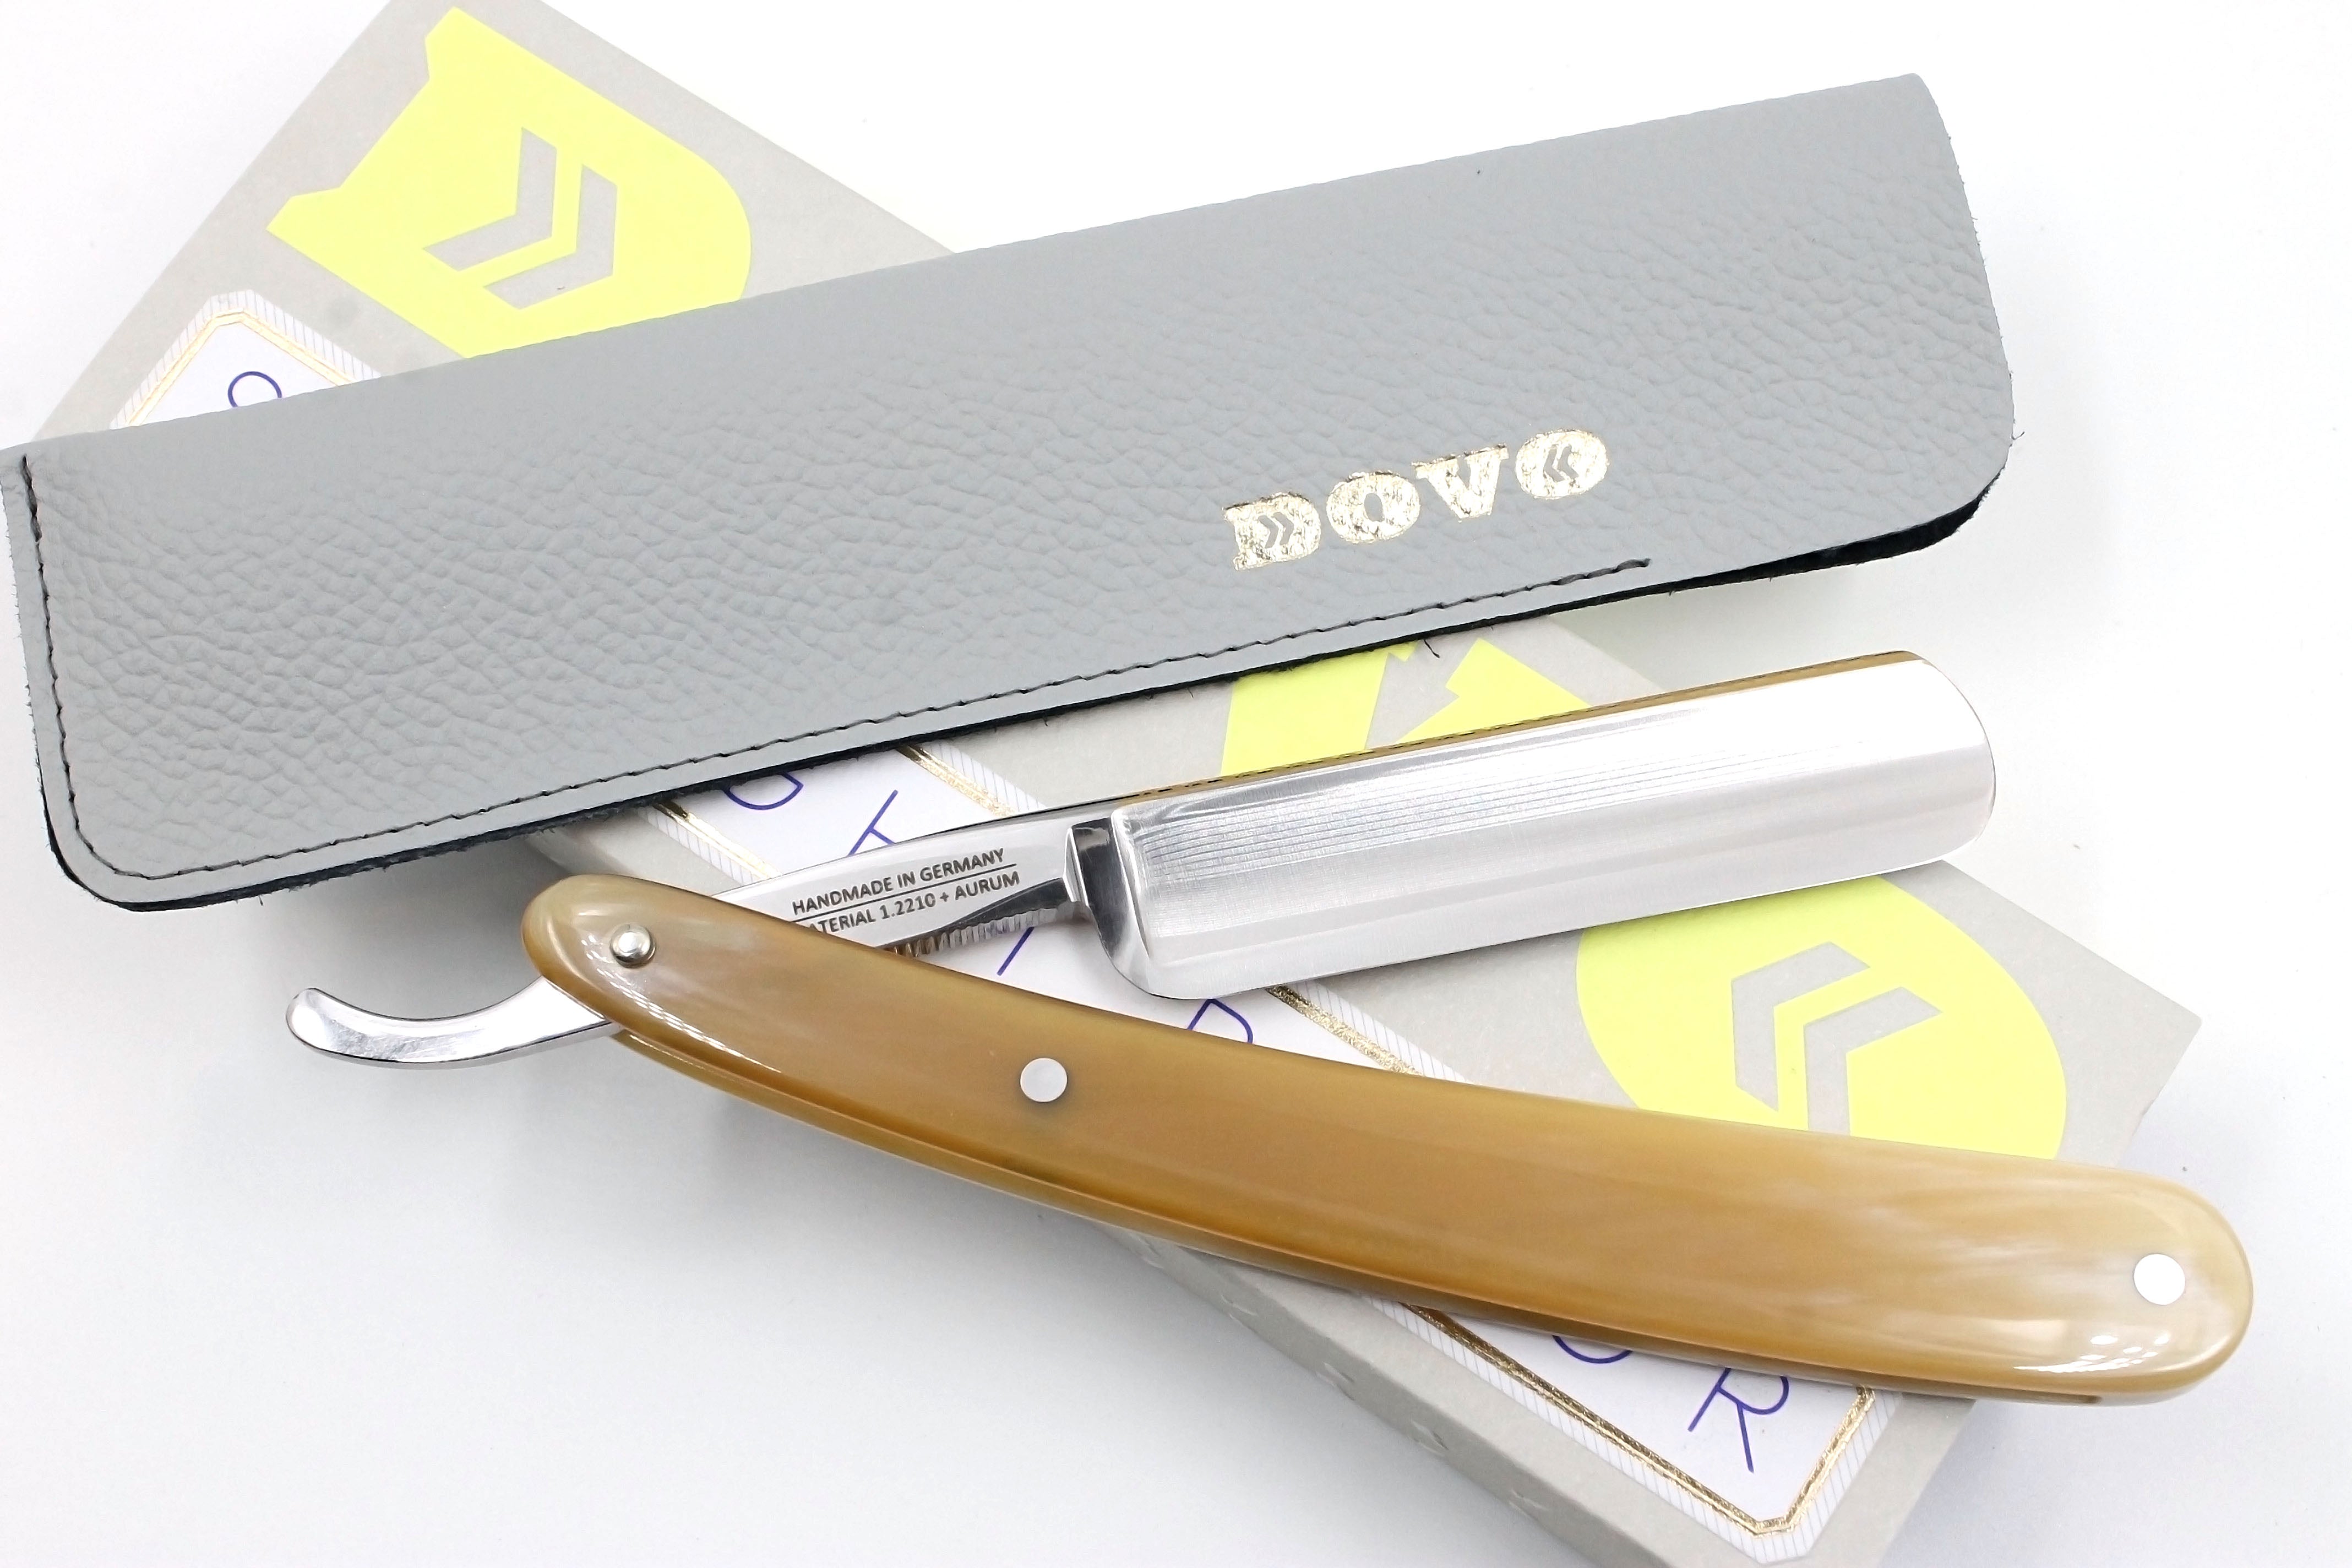 Dovo "Prima" Horn Handle 5/8 Etched, Engraved and Gold Washed Full Hollow Solingen Straight Razor